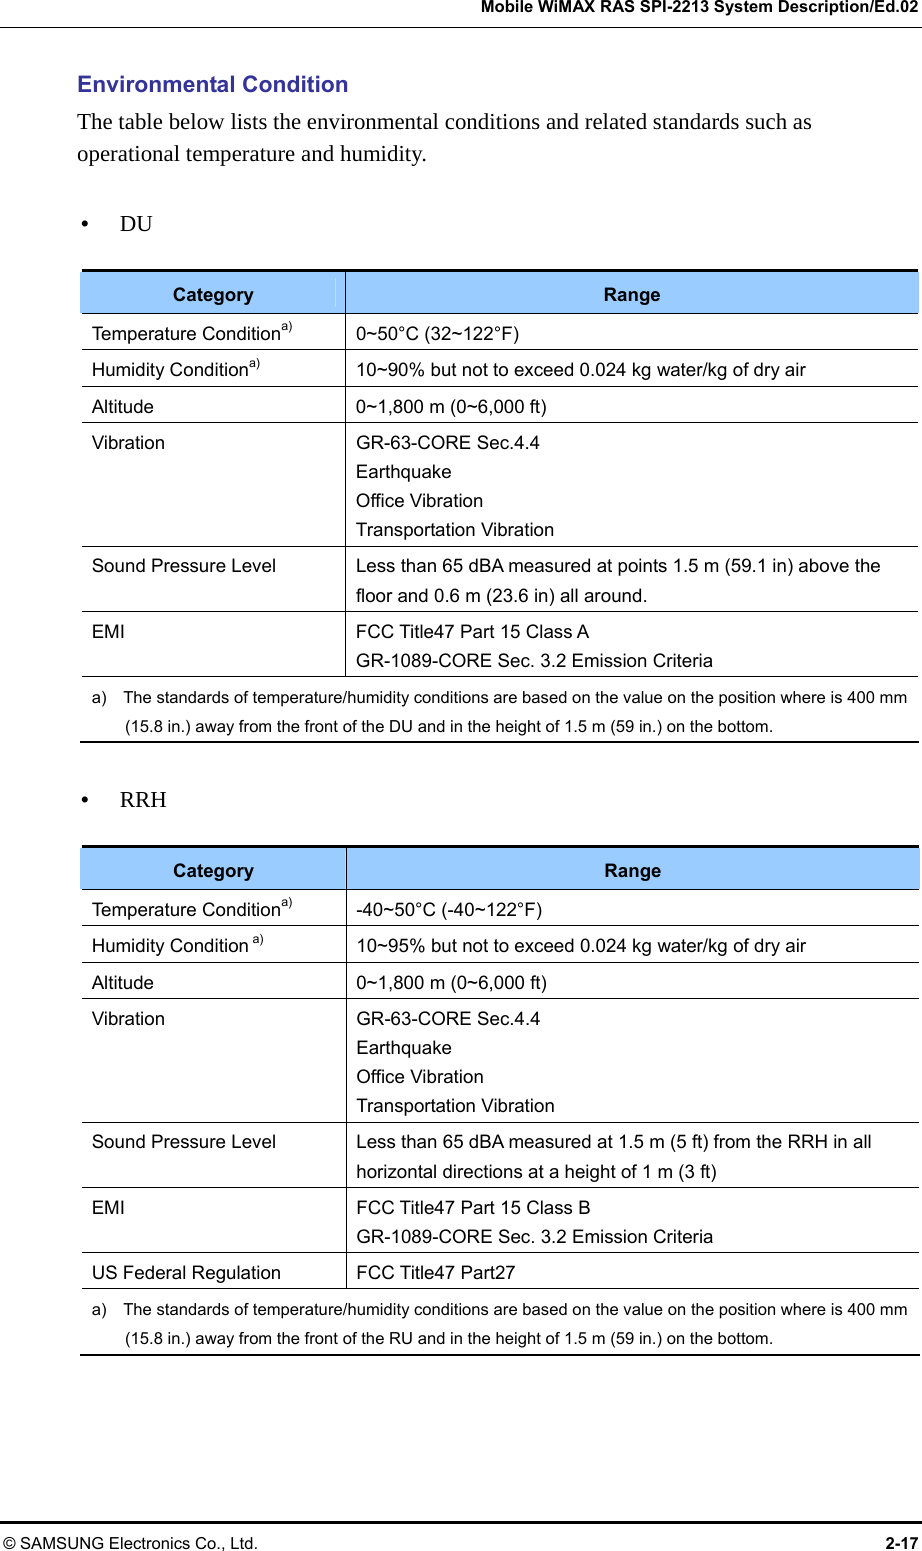   Mobile WiMAX RAS SPI-2213 System Description/Ed.02 © SAMSUNG Electronics Co., Ltd.  2-17 Environmental Condition The table below lists the environmental conditions and related standards such as operational temperature and humidity.  y DU  Category  Range Temperature Conditiona) 0~50°C (32~122°F) Humidity Conditiona)  10~90% but not to exceed 0.024 kg water/kg of dry air Altitude  0~1,800 m (0~6,000 ft) Vibration GR-63-CORE Sec.4.4 Earthquake Office Vibration Transportation Vibration Sound Pressure Level    Less than 65 dBA measured at points 1.5 m (59.1 in) above the floor and 0.6 m (23.6 in) all around. EMI  FCC Title47 Part 15 Class A GR-1089-CORE Sec. 3.2 Emission Criteria a)    The standards of temperature/humidity conditions are based on the value on the position where is 400 mm (15.8 in.) away from the front of the DU and in the height of 1.5 m (59 in.) on the bottom.  y RRH  Category  Range Temperature Conditiona) -40~50°C (-40~122°F) Humidity Condition a)  10~95% but not to exceed 0.024 kg water/kg of dry air Altitude  0~1,800 m (0~6,000 ft) Vibration GR-63-CORE Sec.4.4 Earthquake Office Vibration Transportation Vibration Sound Pressure Level  Less than 65 dBA measured at 1.5 m (5 ft) from the RRH in all horizontal directions at a height of 1 m (3 ft) EMI  FCC Title47 Part 15 Class B GR-1089-CORE Sec. 3.2 Emission Criteria US Federal Regulation  FCC Title47 Part27 a)    The standards of temperature/humidity conditions are based on the value on the position where is 400 mm (15.8 in.) away from the front of the RU and in the height of 1.5 m (59 in.) on the bottom.  